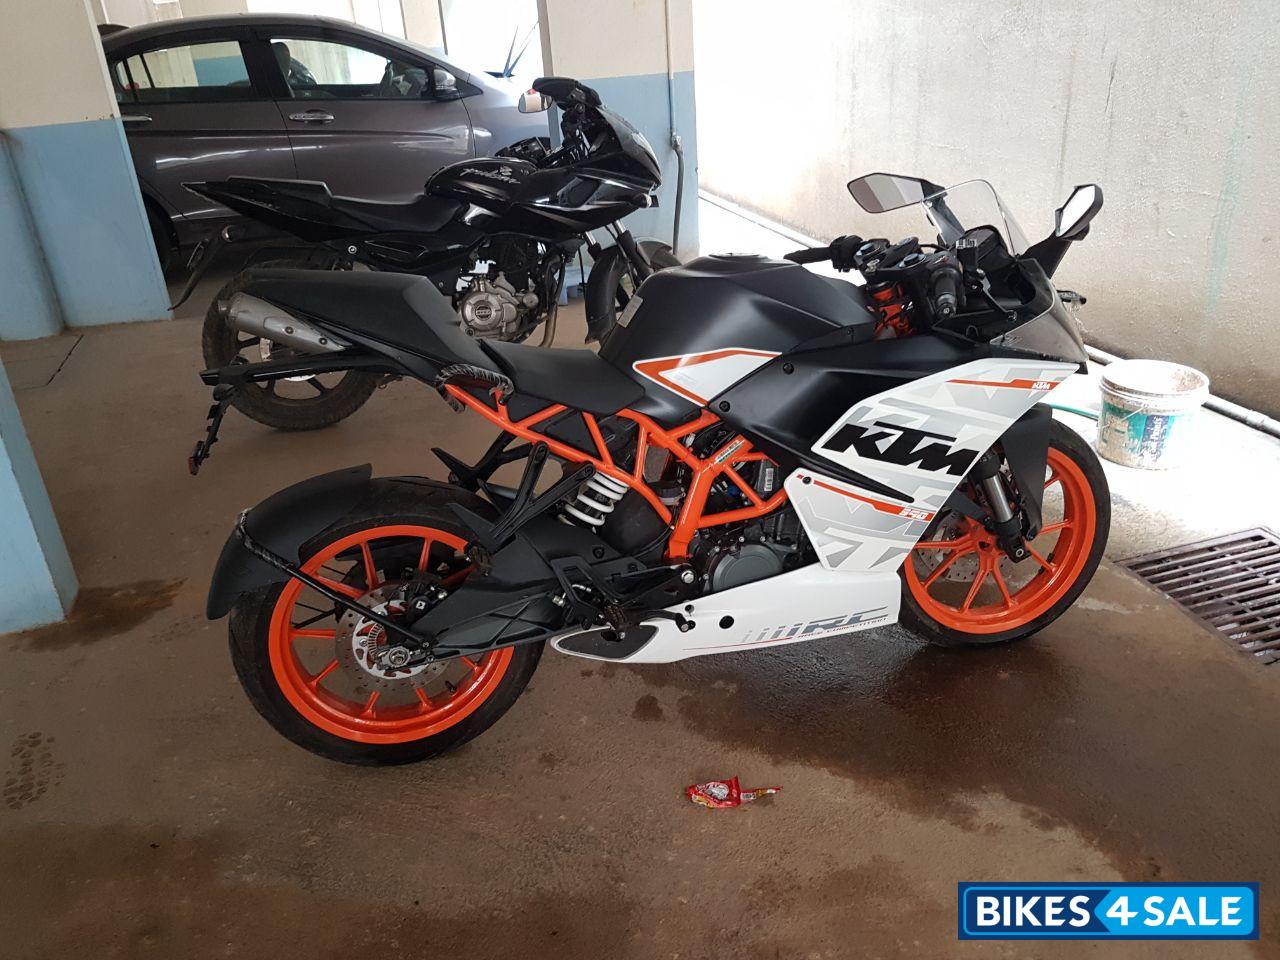 Used 2017 model KTM RC 390 for sale in Bangalore. ID 159697. Black ...